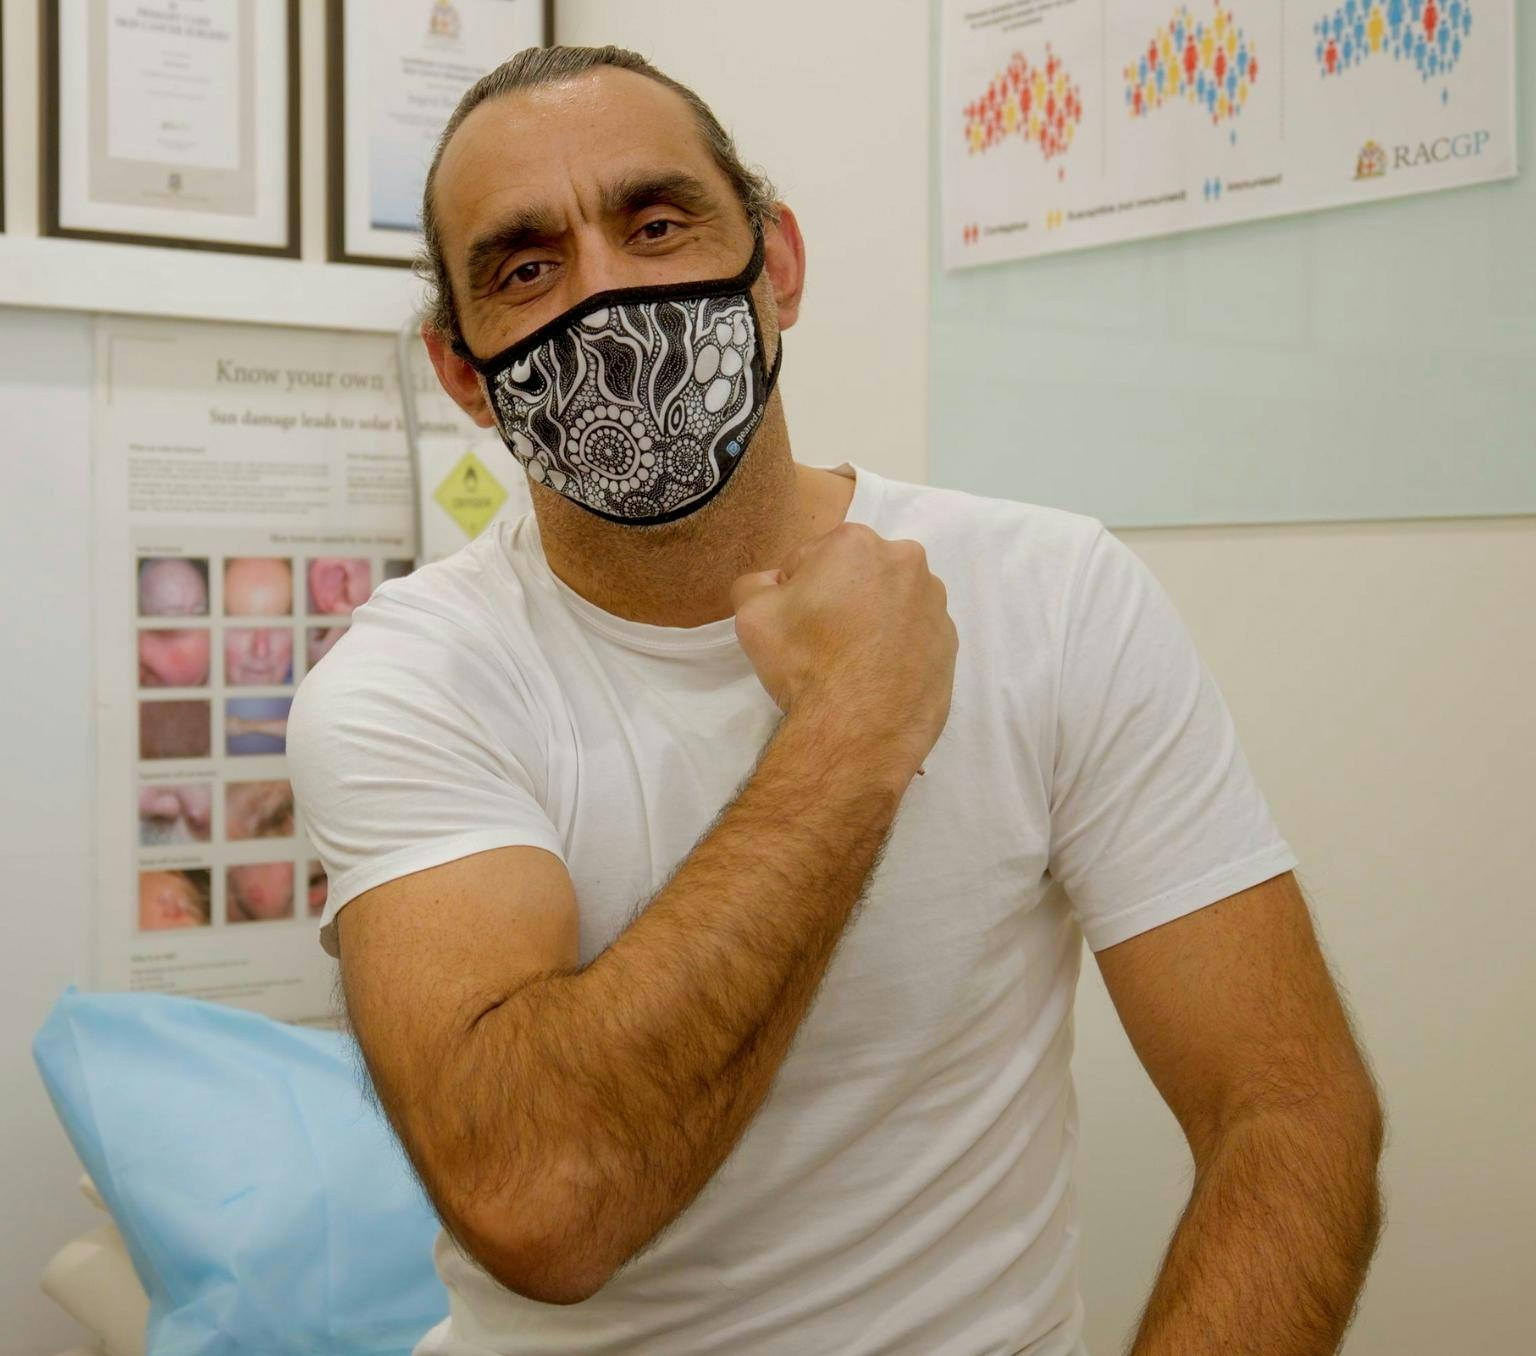 Adam Goodes is wearing a white Tshirt. He is wearing a mask with a black and white Indigenous artwork. His right arm is held across his chest. He is sitting in a room surrounded by medical posters.